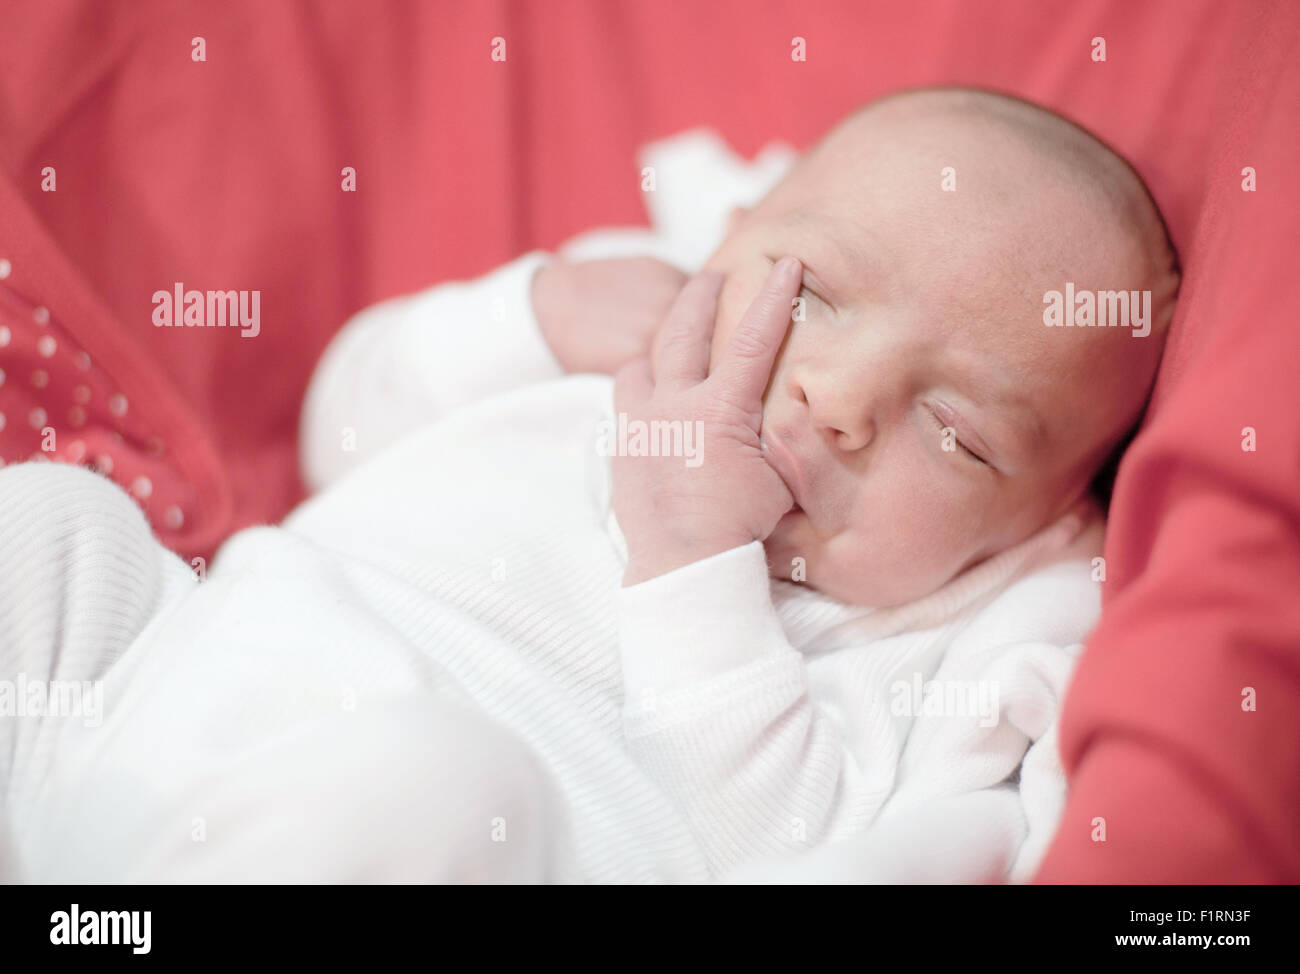 Cute newborn baby girl sleeping with finger in mouth Stock Photo